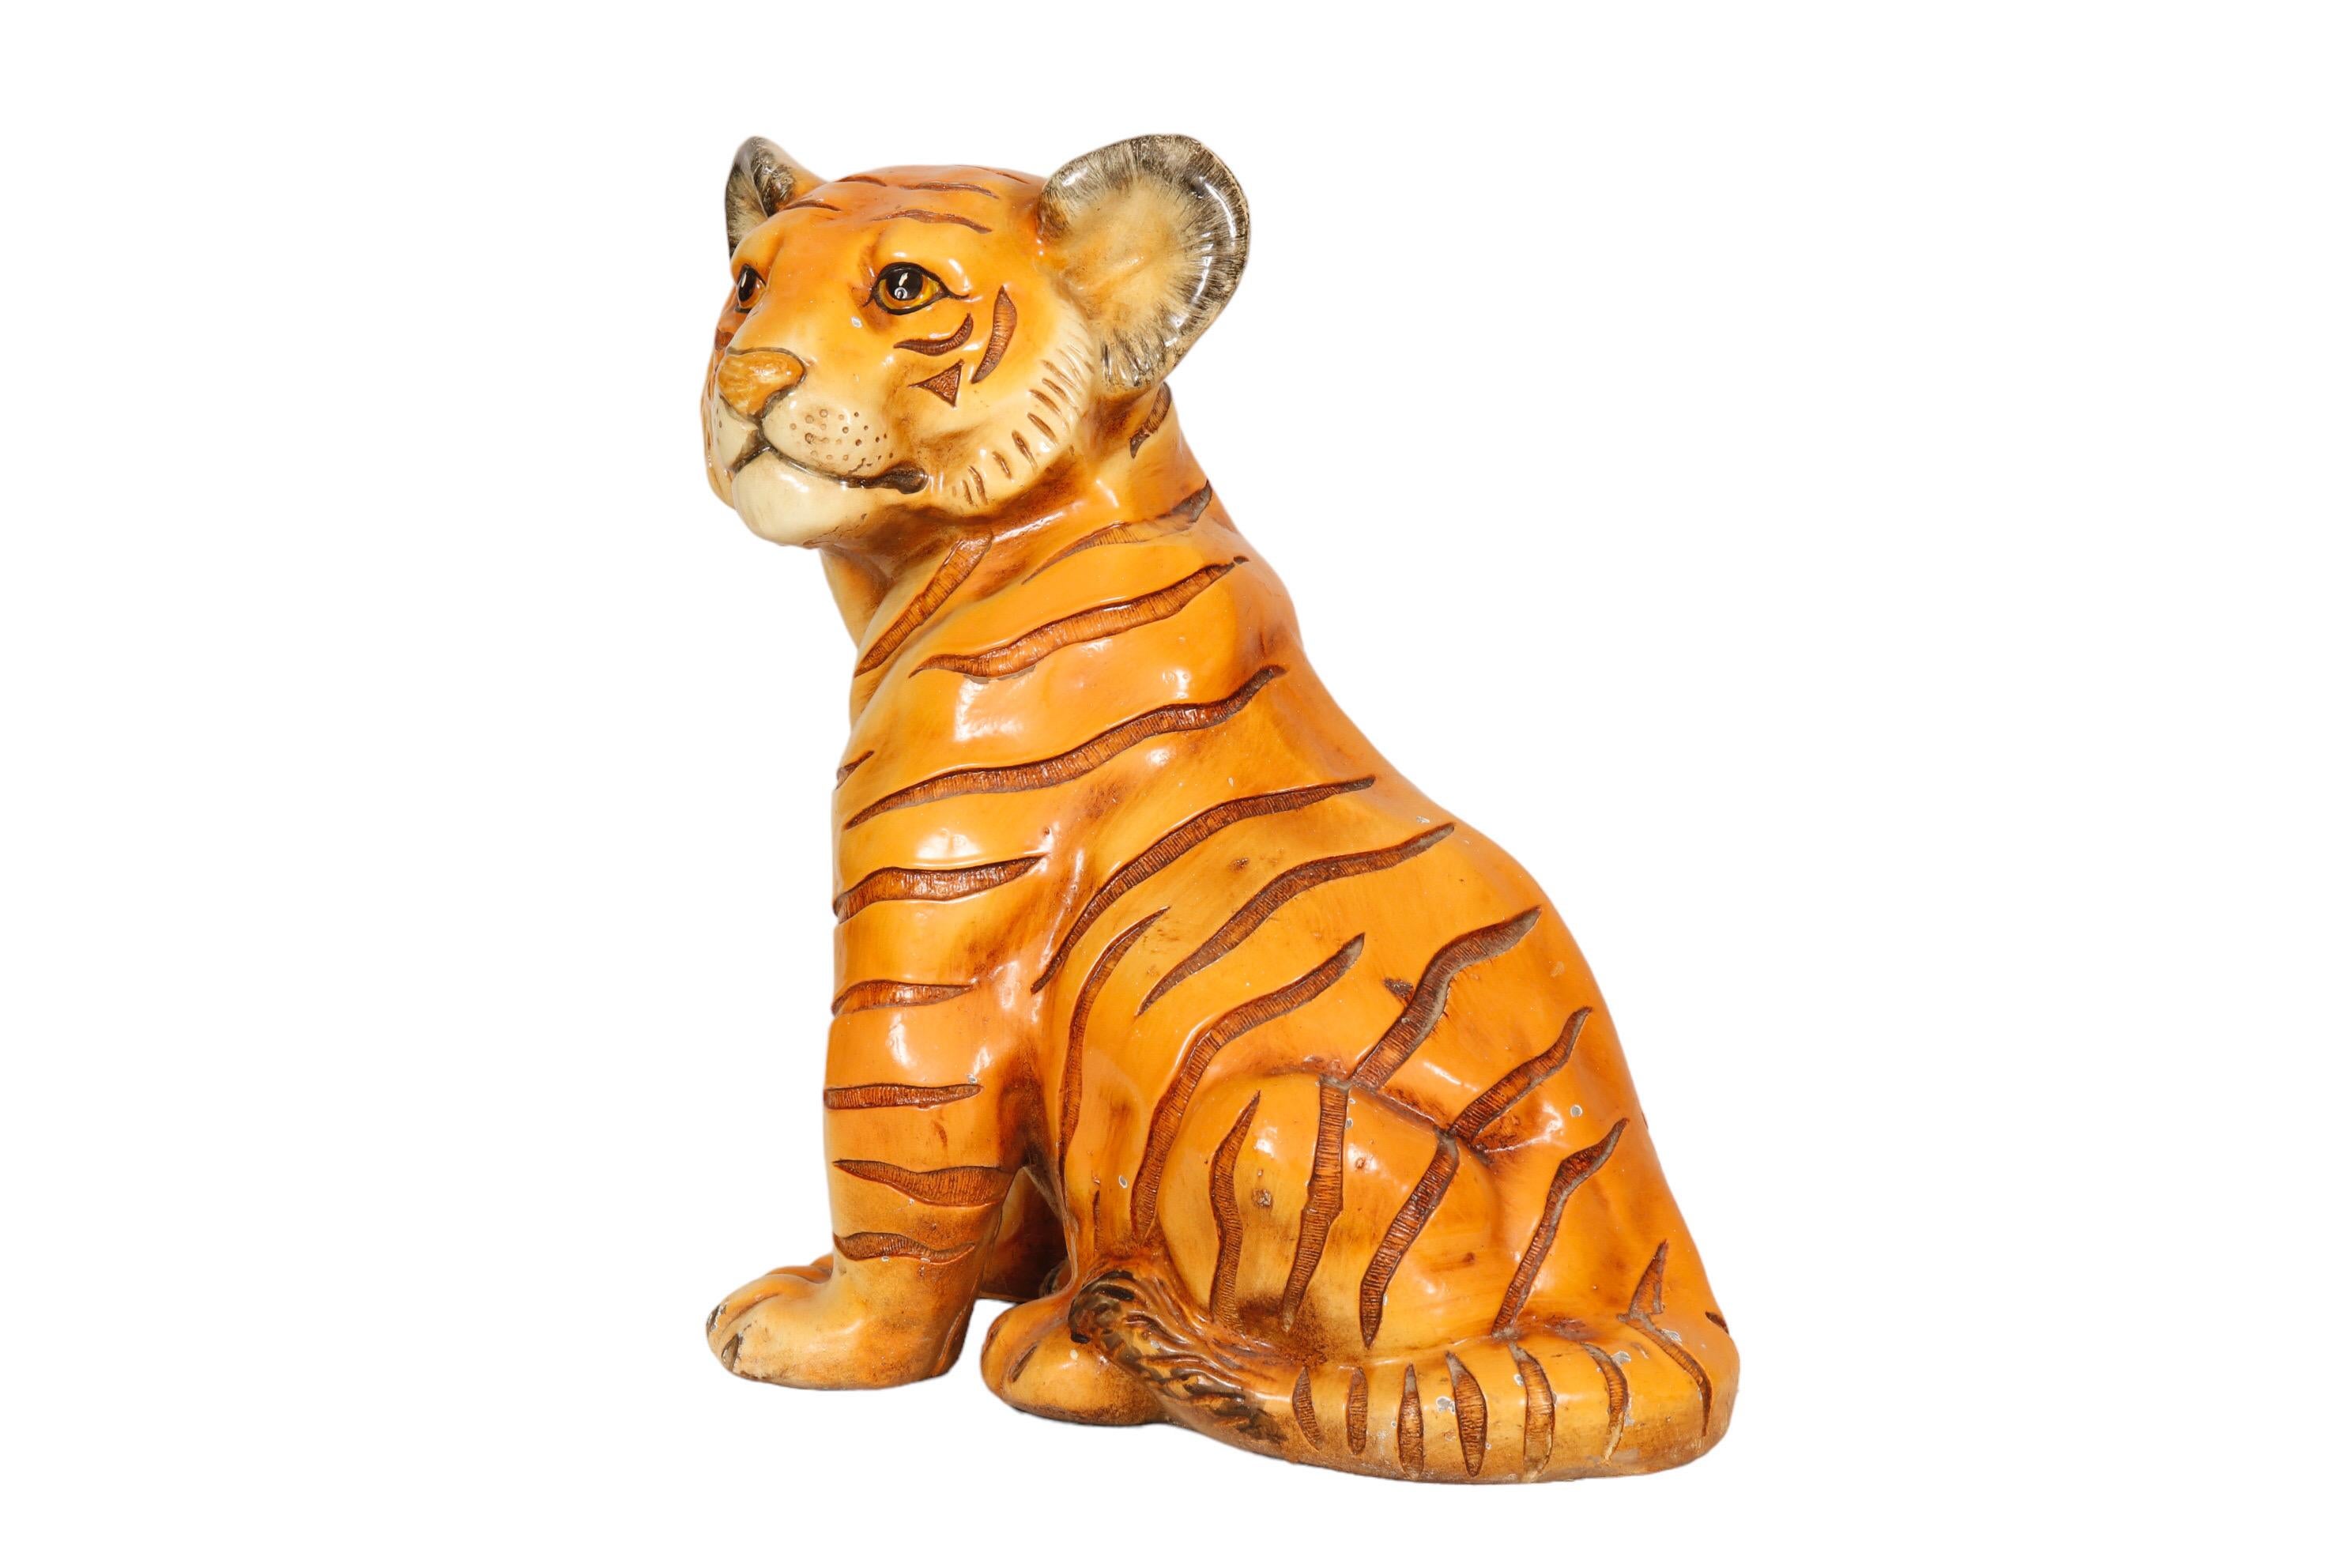 A large gypsum sculpture of a tiger cub. Cast in a life-like manner with embossed details on the stripes, the face and paws. Hand painted with fine lines around the eyes, ears, nose and mouth. Marwal Industries Inc. maker's mark is visible in the